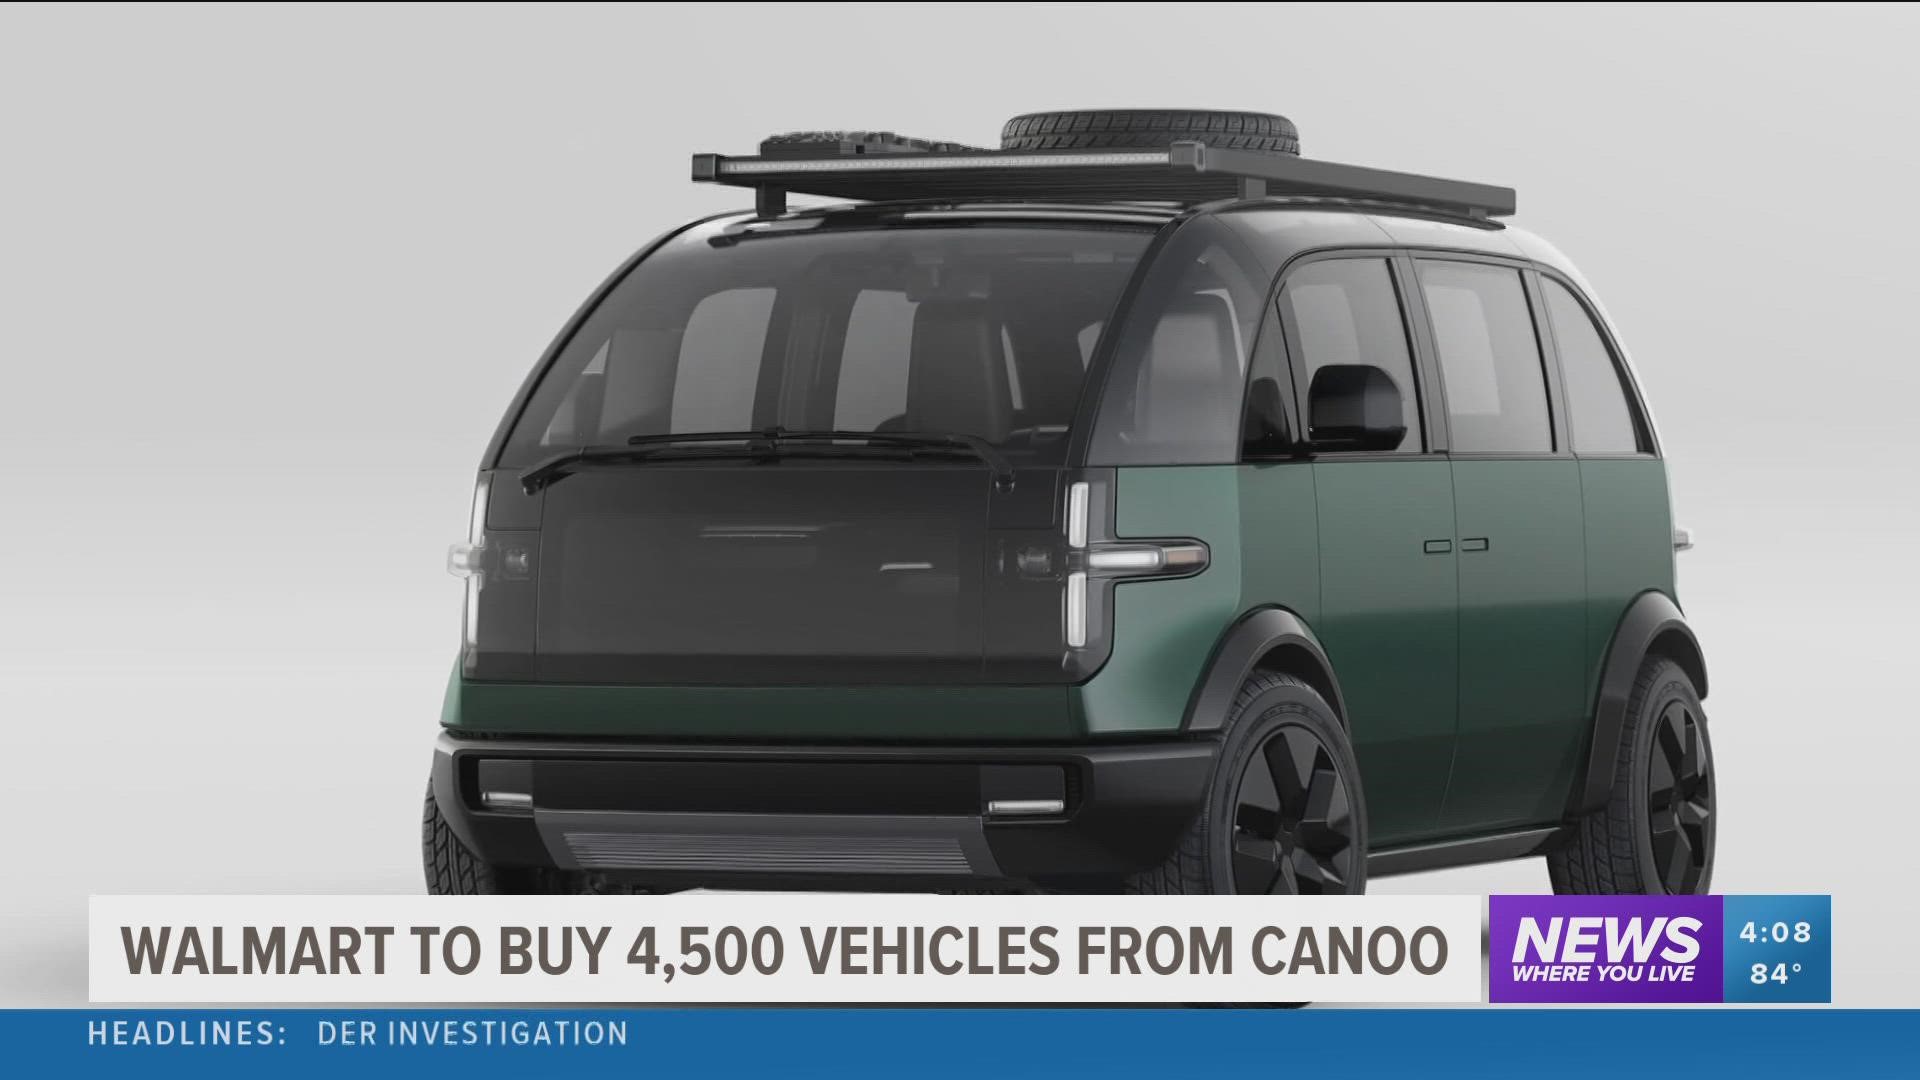 Walmart plans to purchase a fleet of advanced all-electric delivery vehicles from advanced mobility company Canoo.